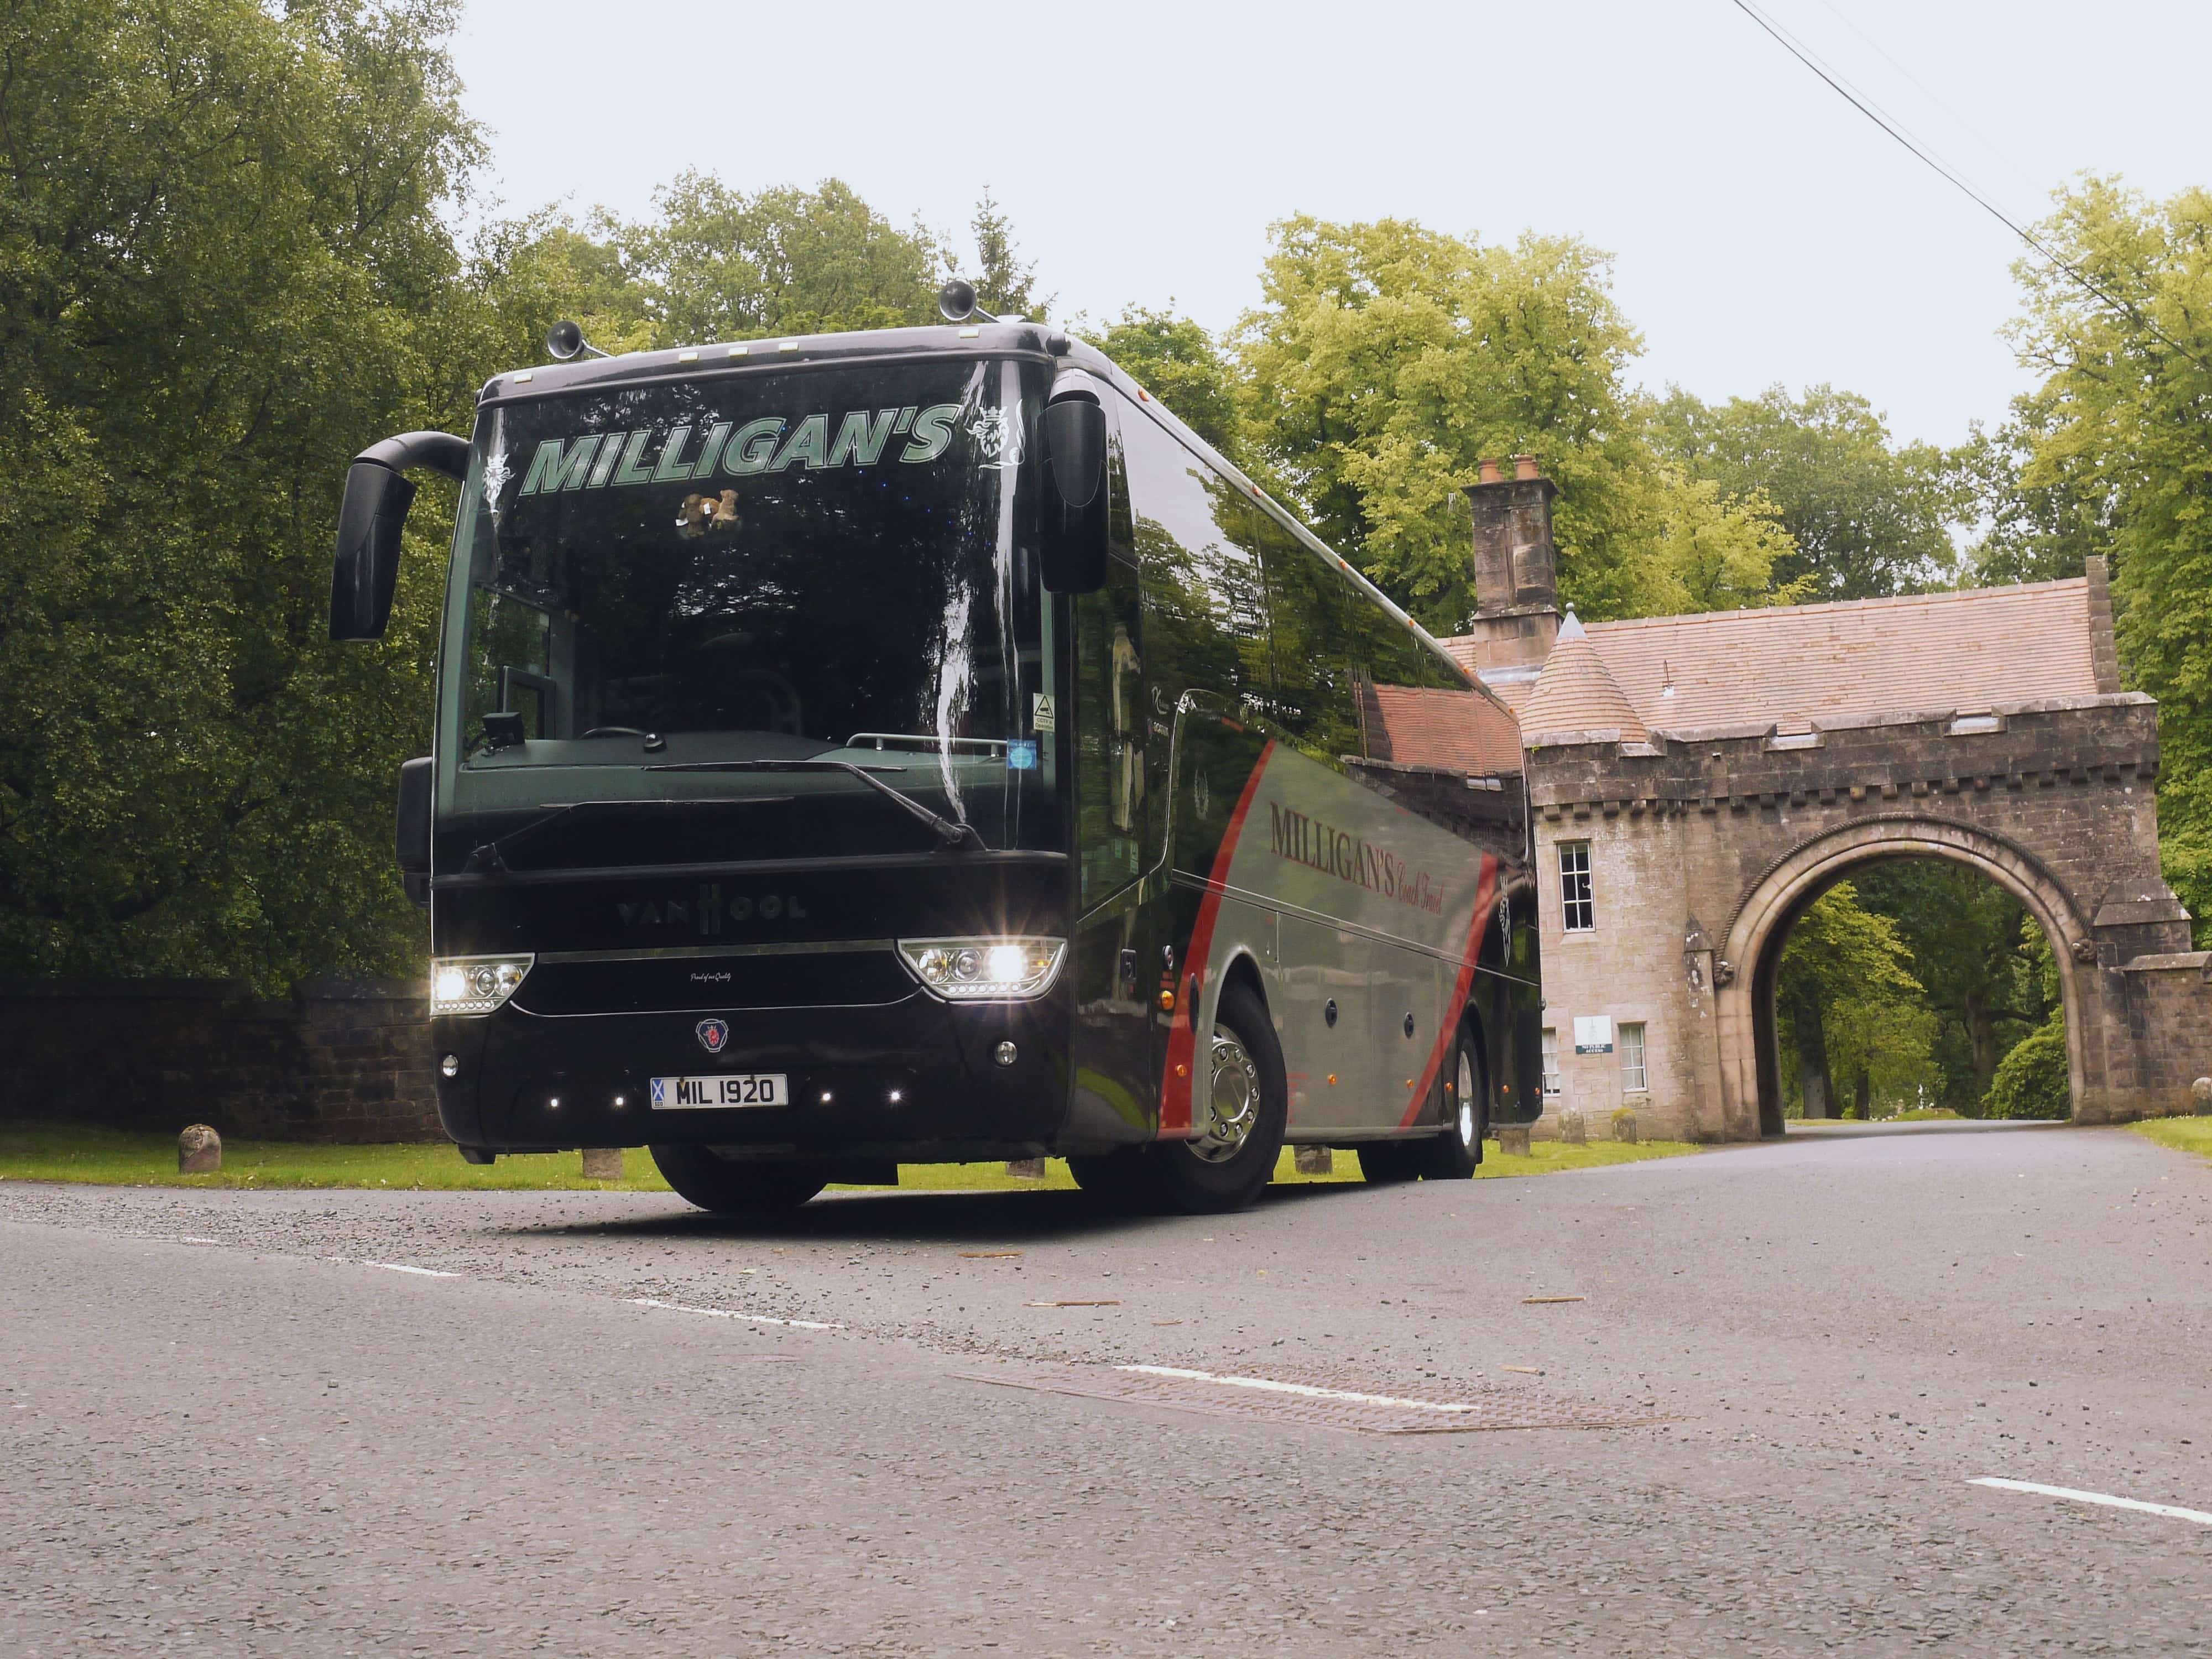 Photo shows a Milligan's branded coach parked in front of an archway.